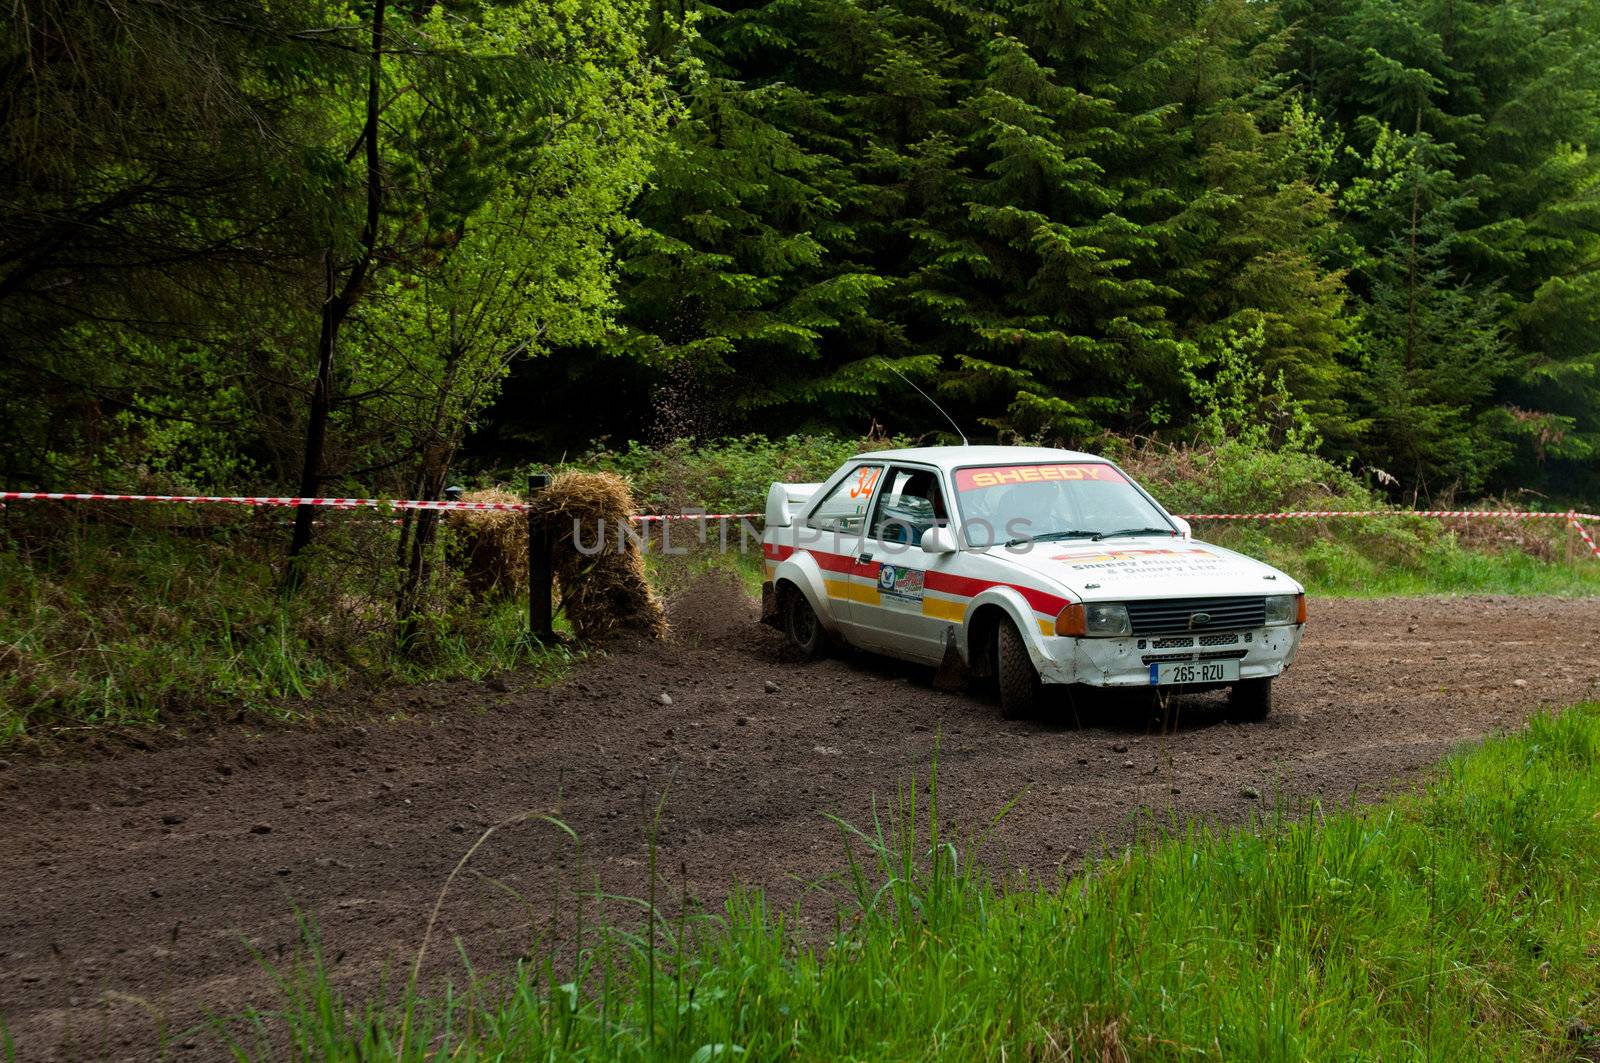 MALLOW, IRELAND - MAY 19: M. Sheedy driving Ford Escort at the Jim Walsh Cork Forest Rally on May 19, 2012 in Mallow, Ireland. 4th round of the Valvoline National Forest Rally Championship.